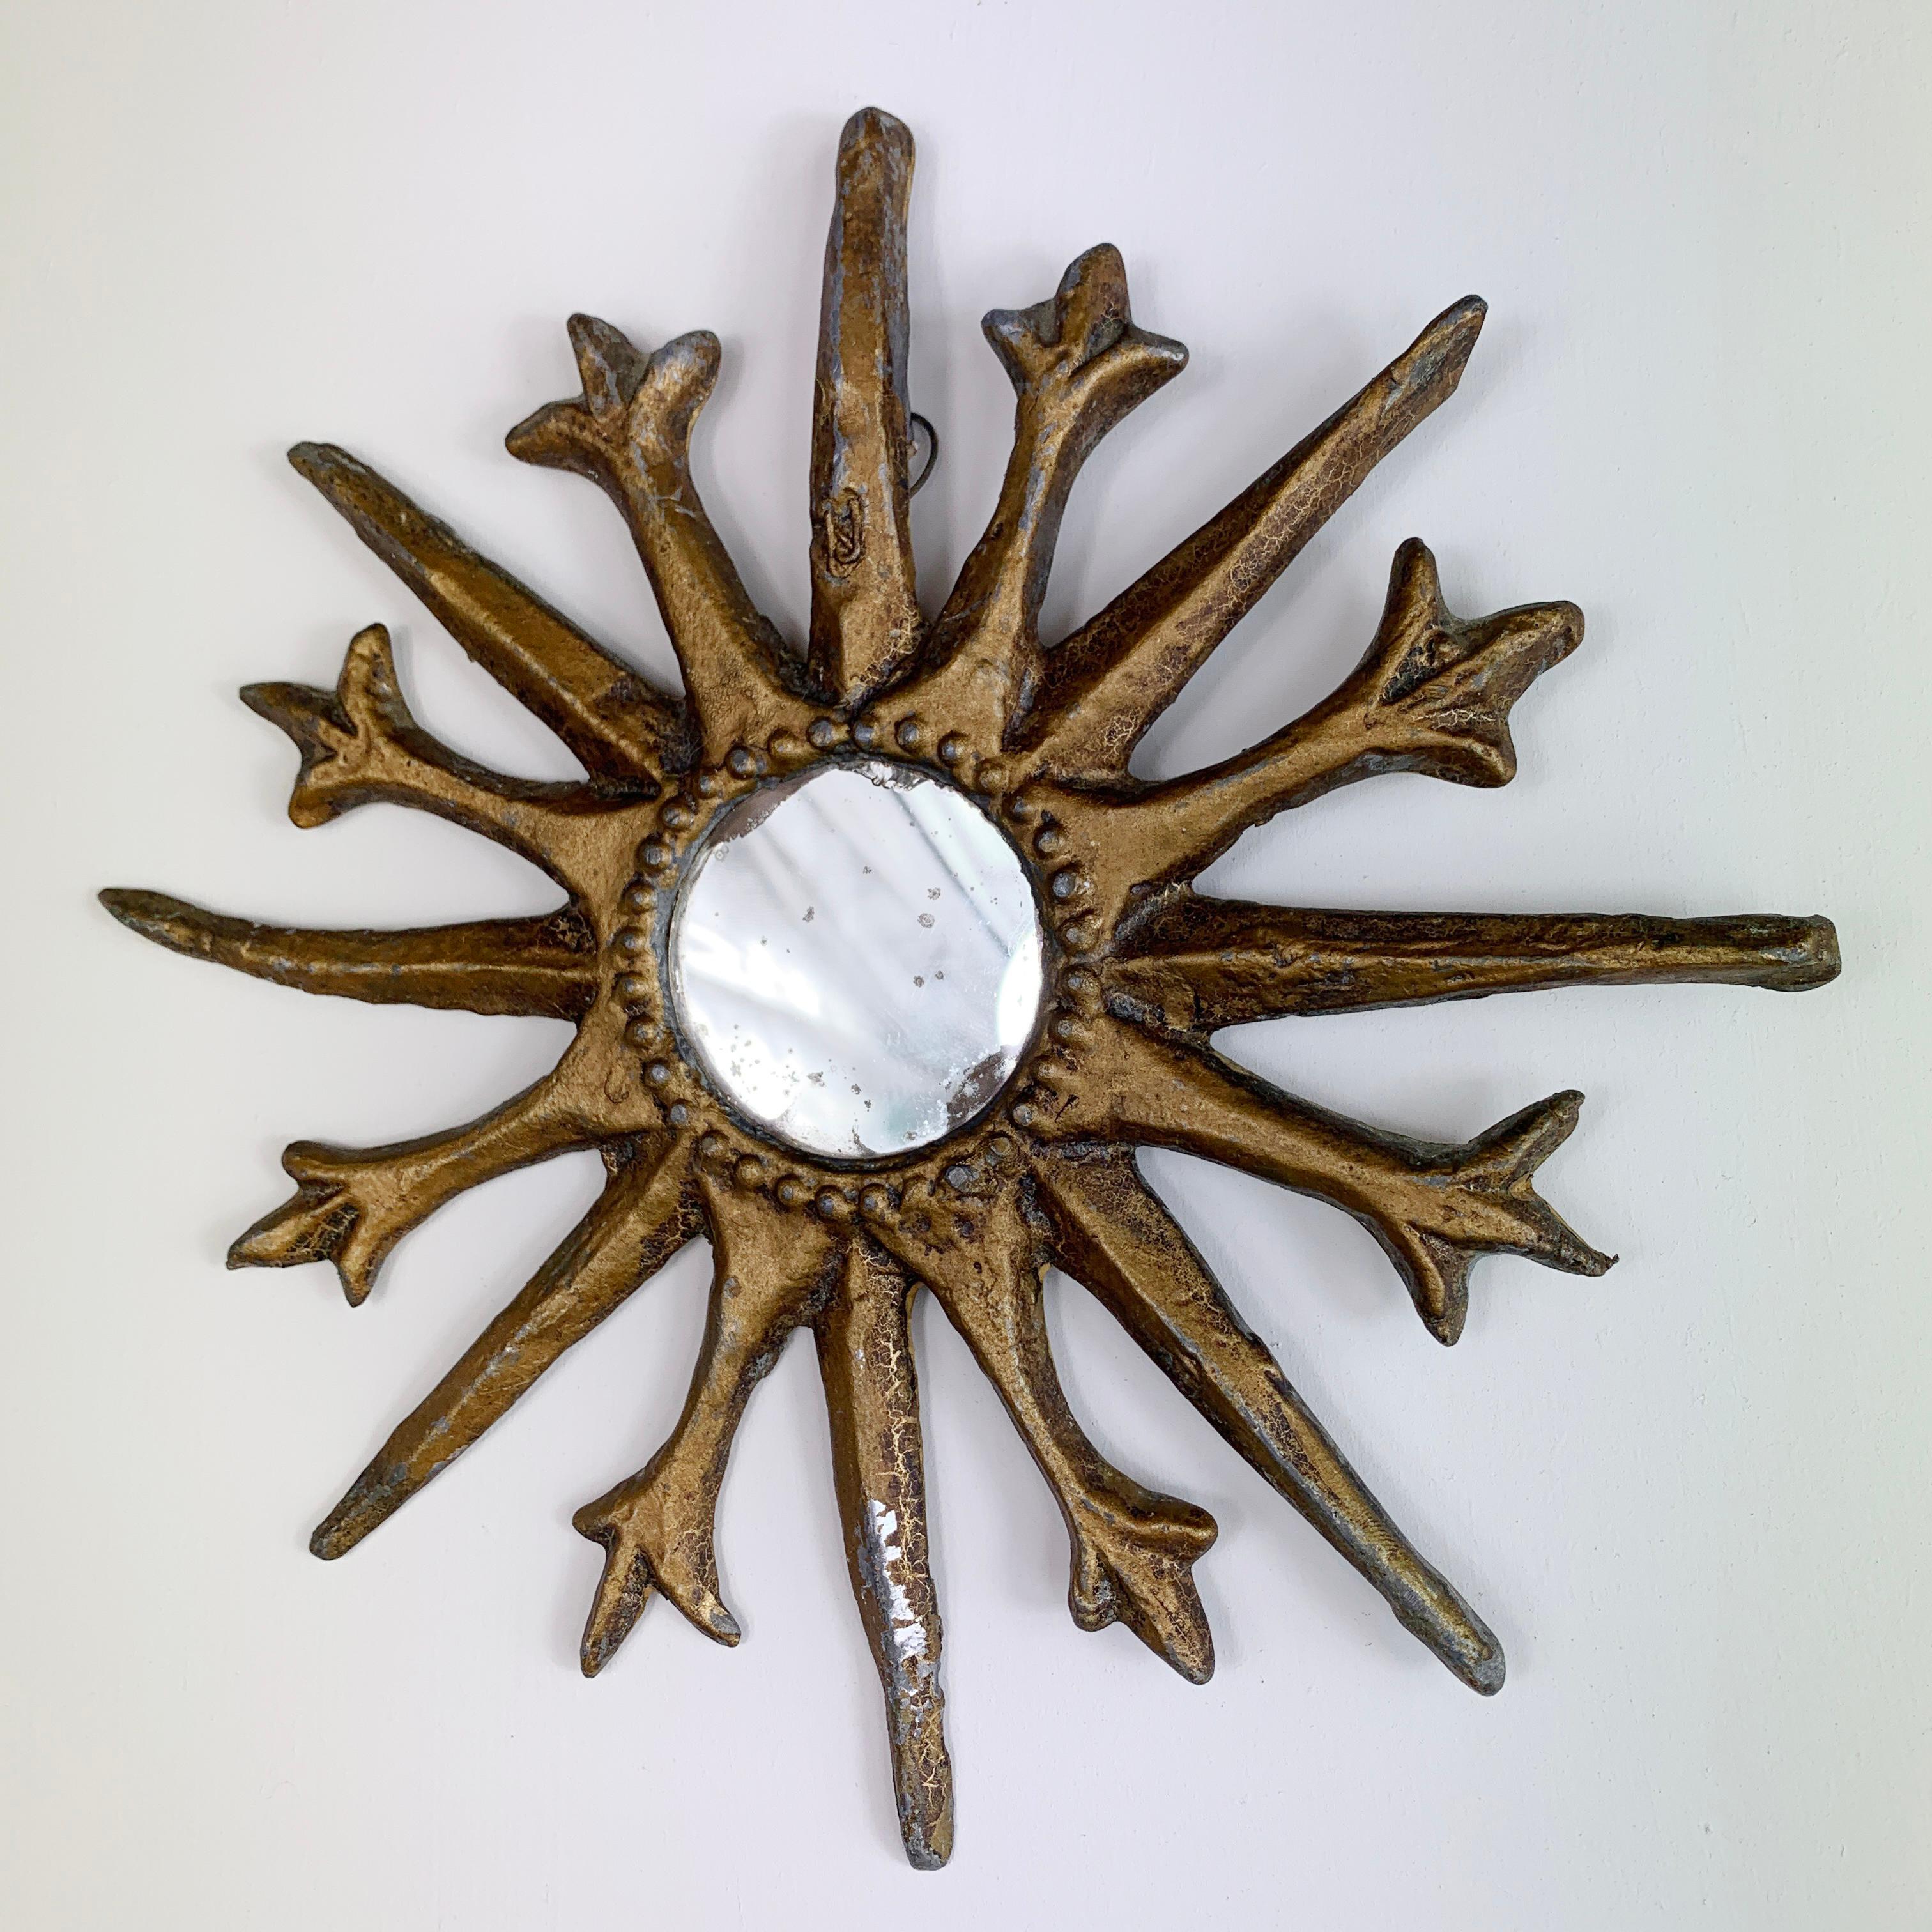 A charming and very rare folk art sunburst mirror, French, dating the the early 1800's, it is formed out of lead which has been hammered and shaped, it has then been overpainted in gold, a small foxed mirror to the centre.

This is a wonderful